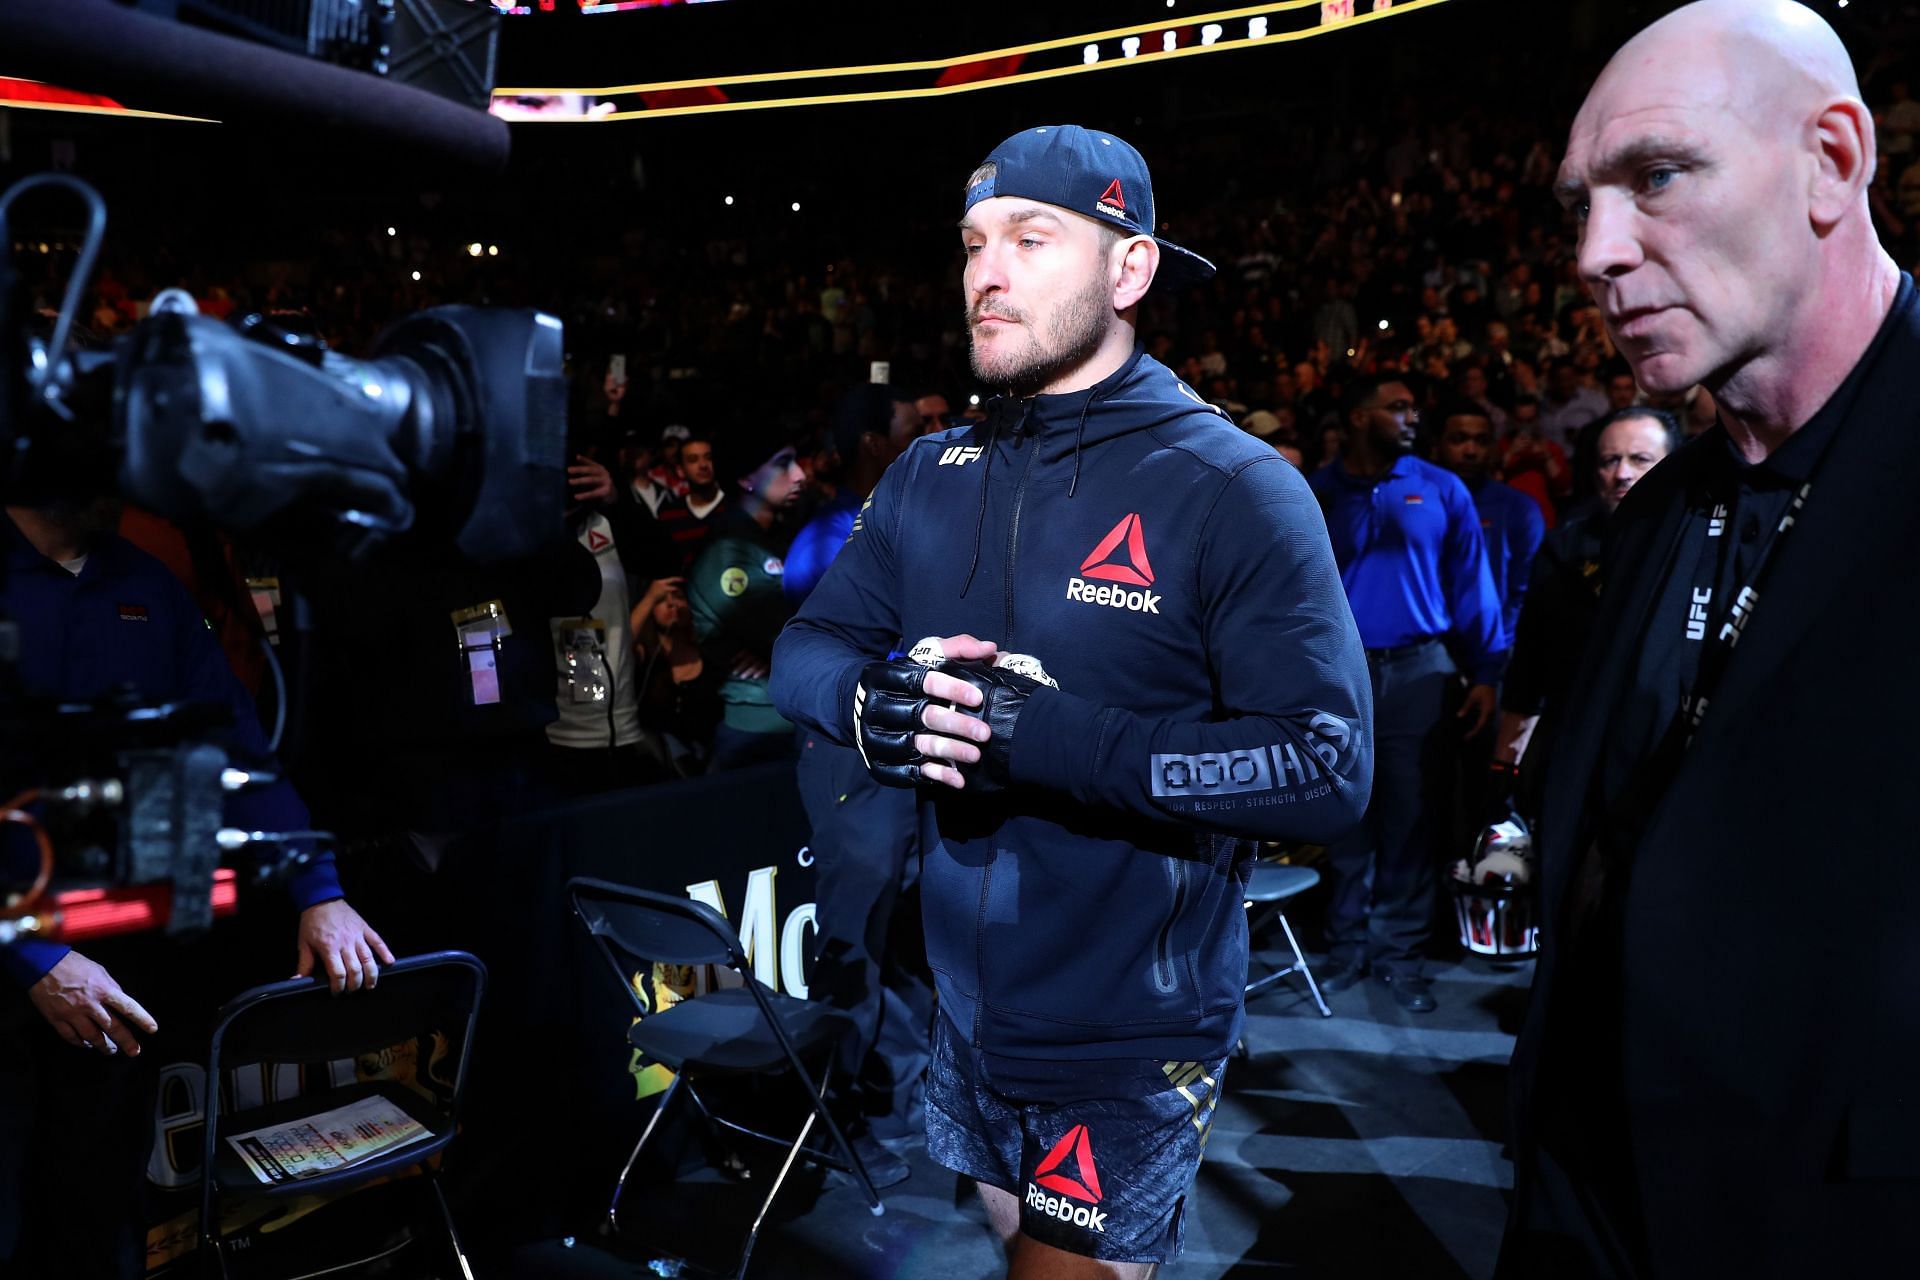 Should Jon Jones be facing an easier opponent than Stipe Miocic in his first heavyweight bout?